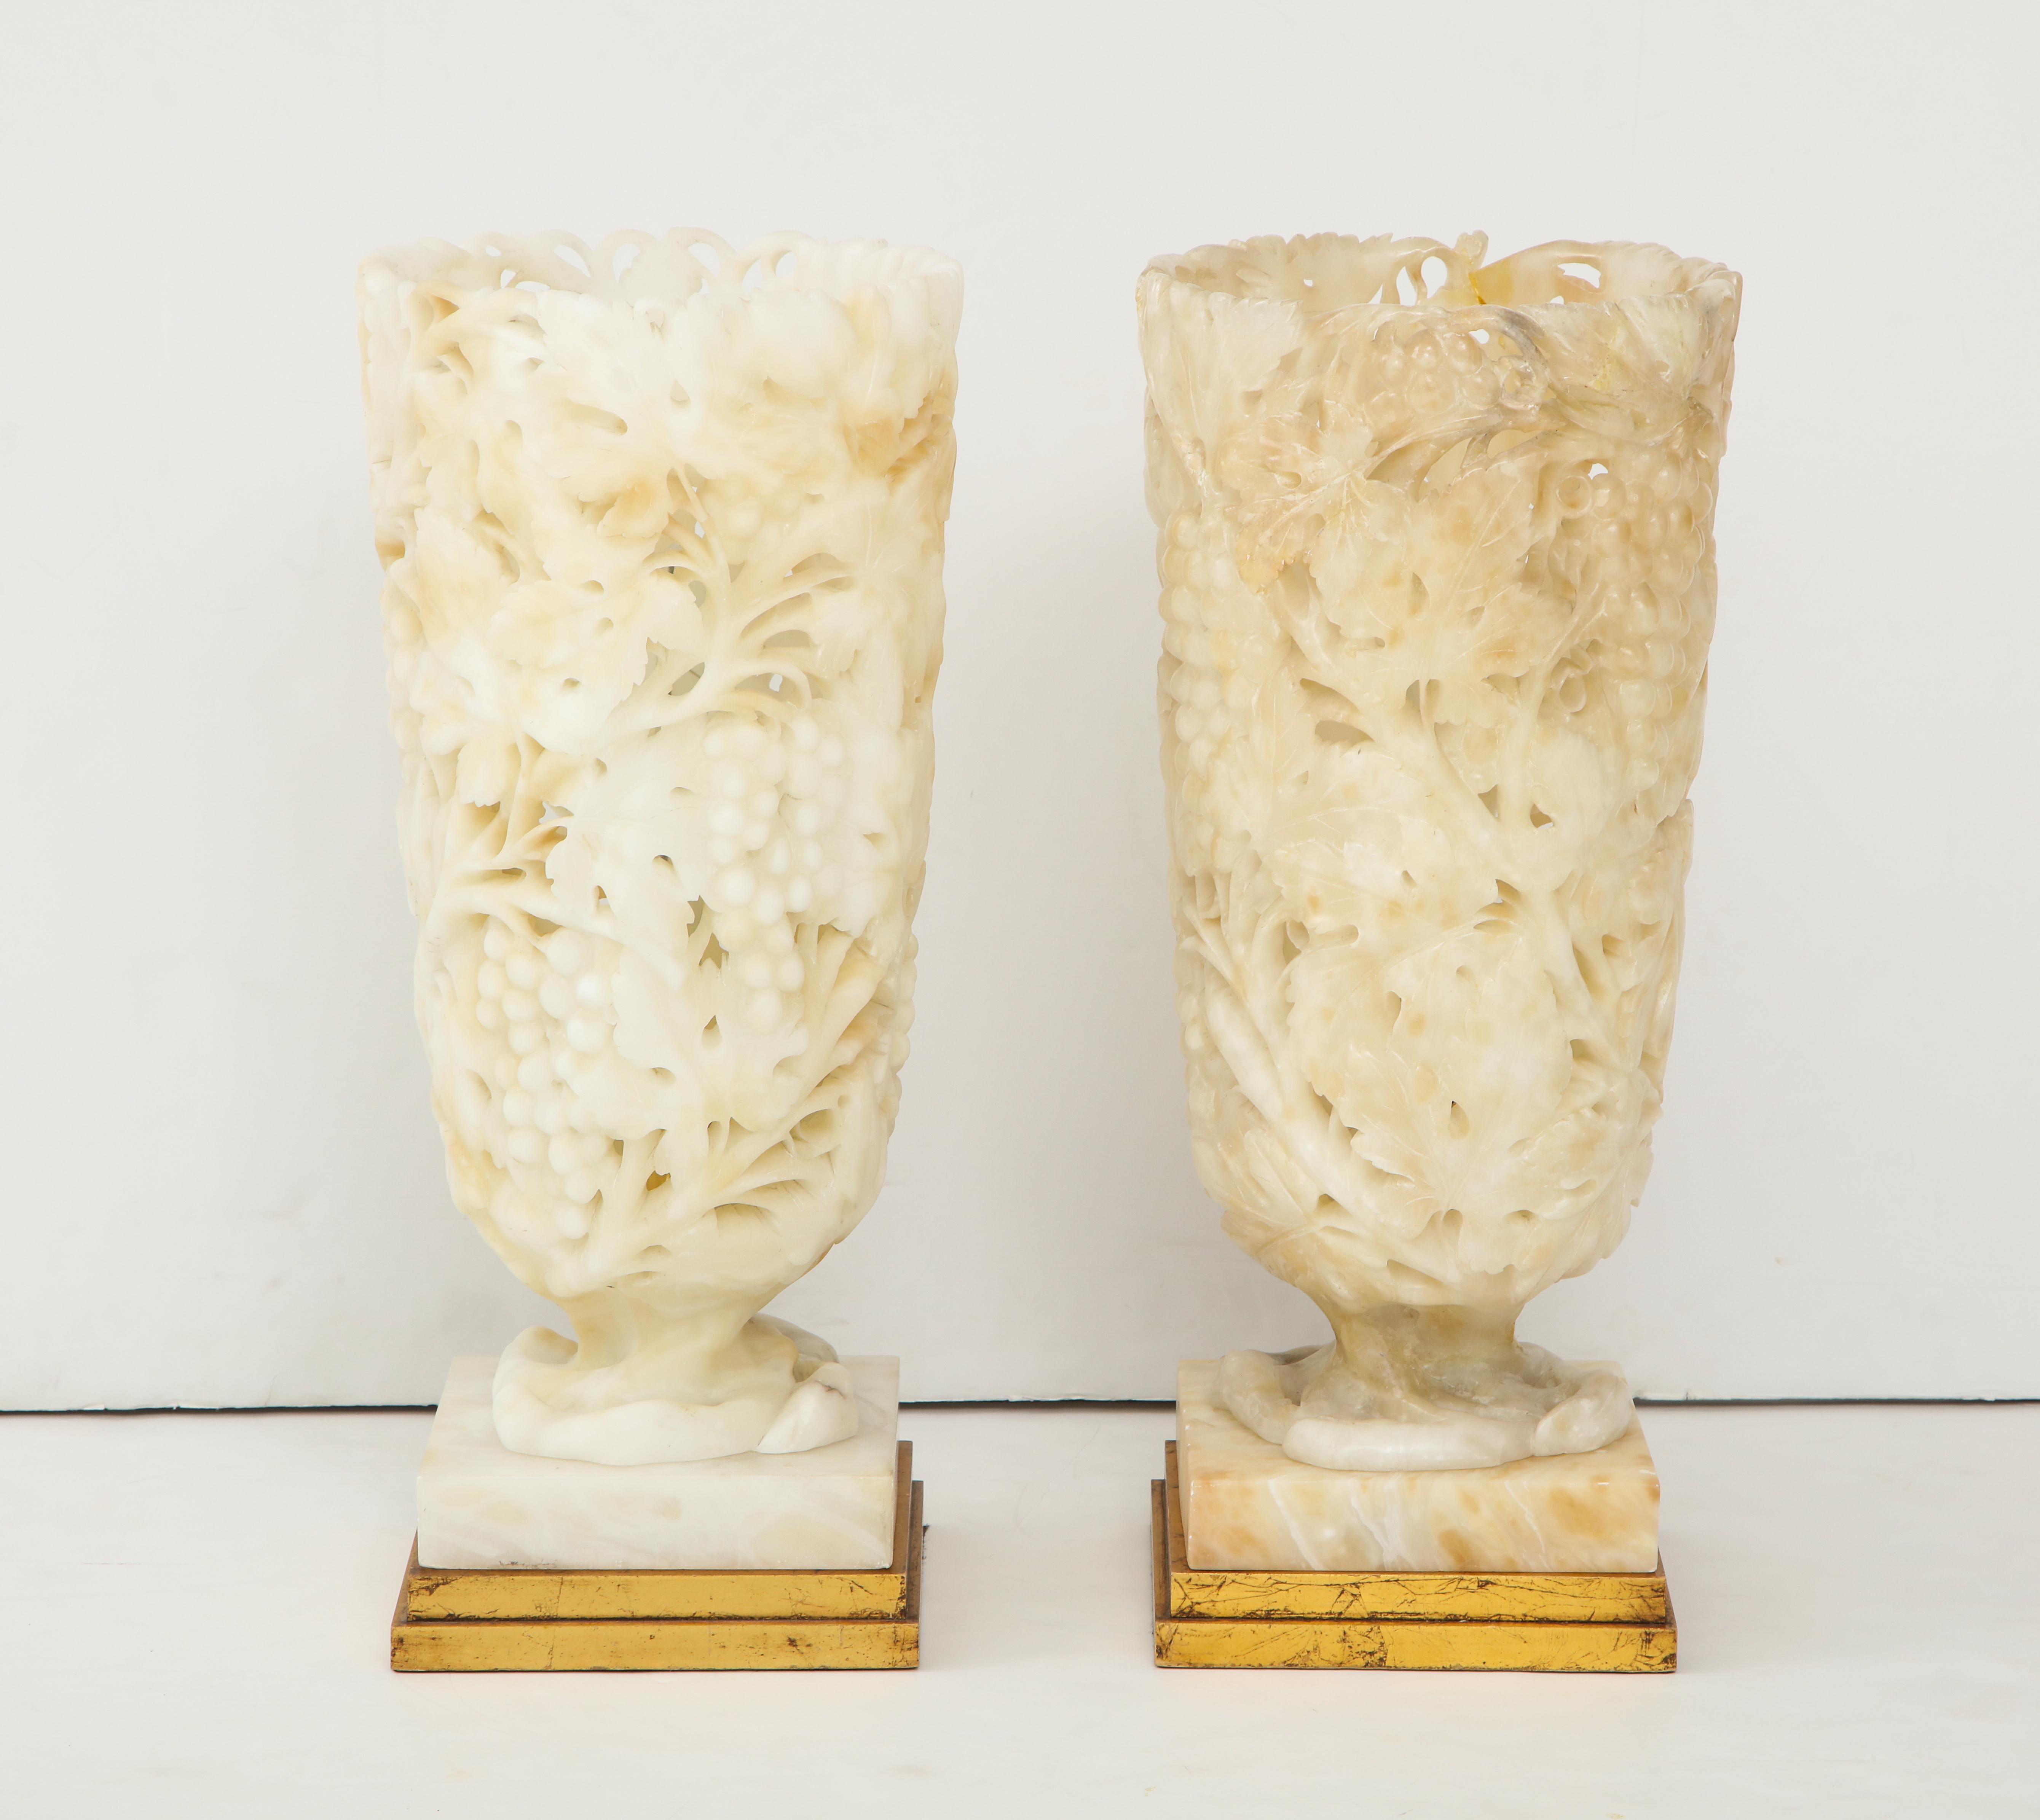 Spectacular pair of carved Alabaster lamps, they are carved with a pierced vine motif.
When illuminated the translucent Alabaster has a wonderful warm glow.
One lamps has been repaired in the past as illustrated in the last image.